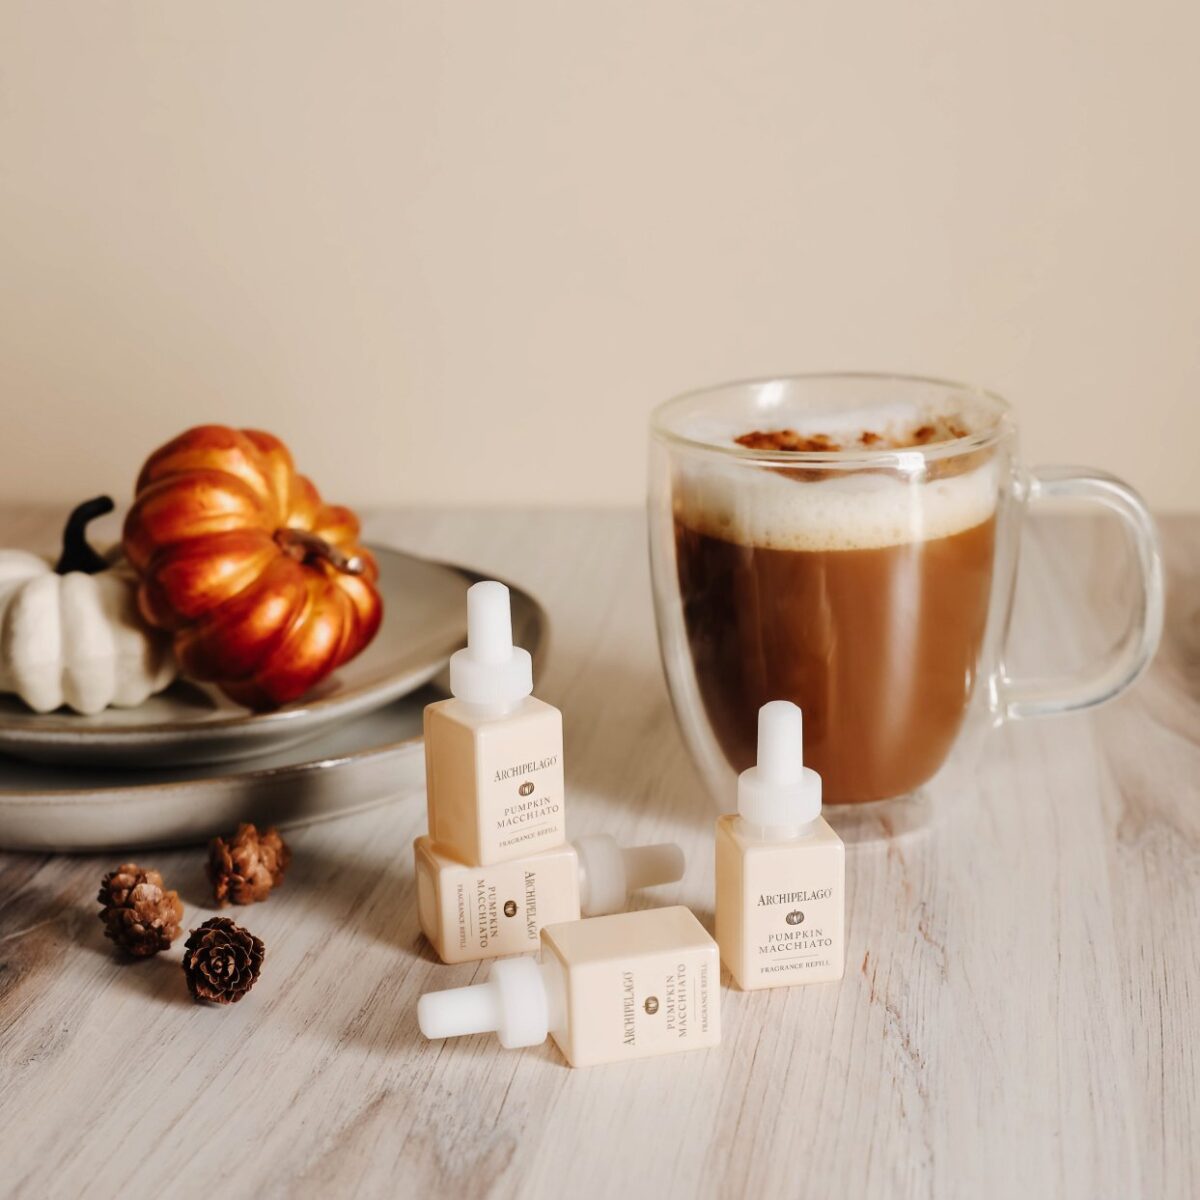 33 Pumpkin Spice Items You Must Try This Season